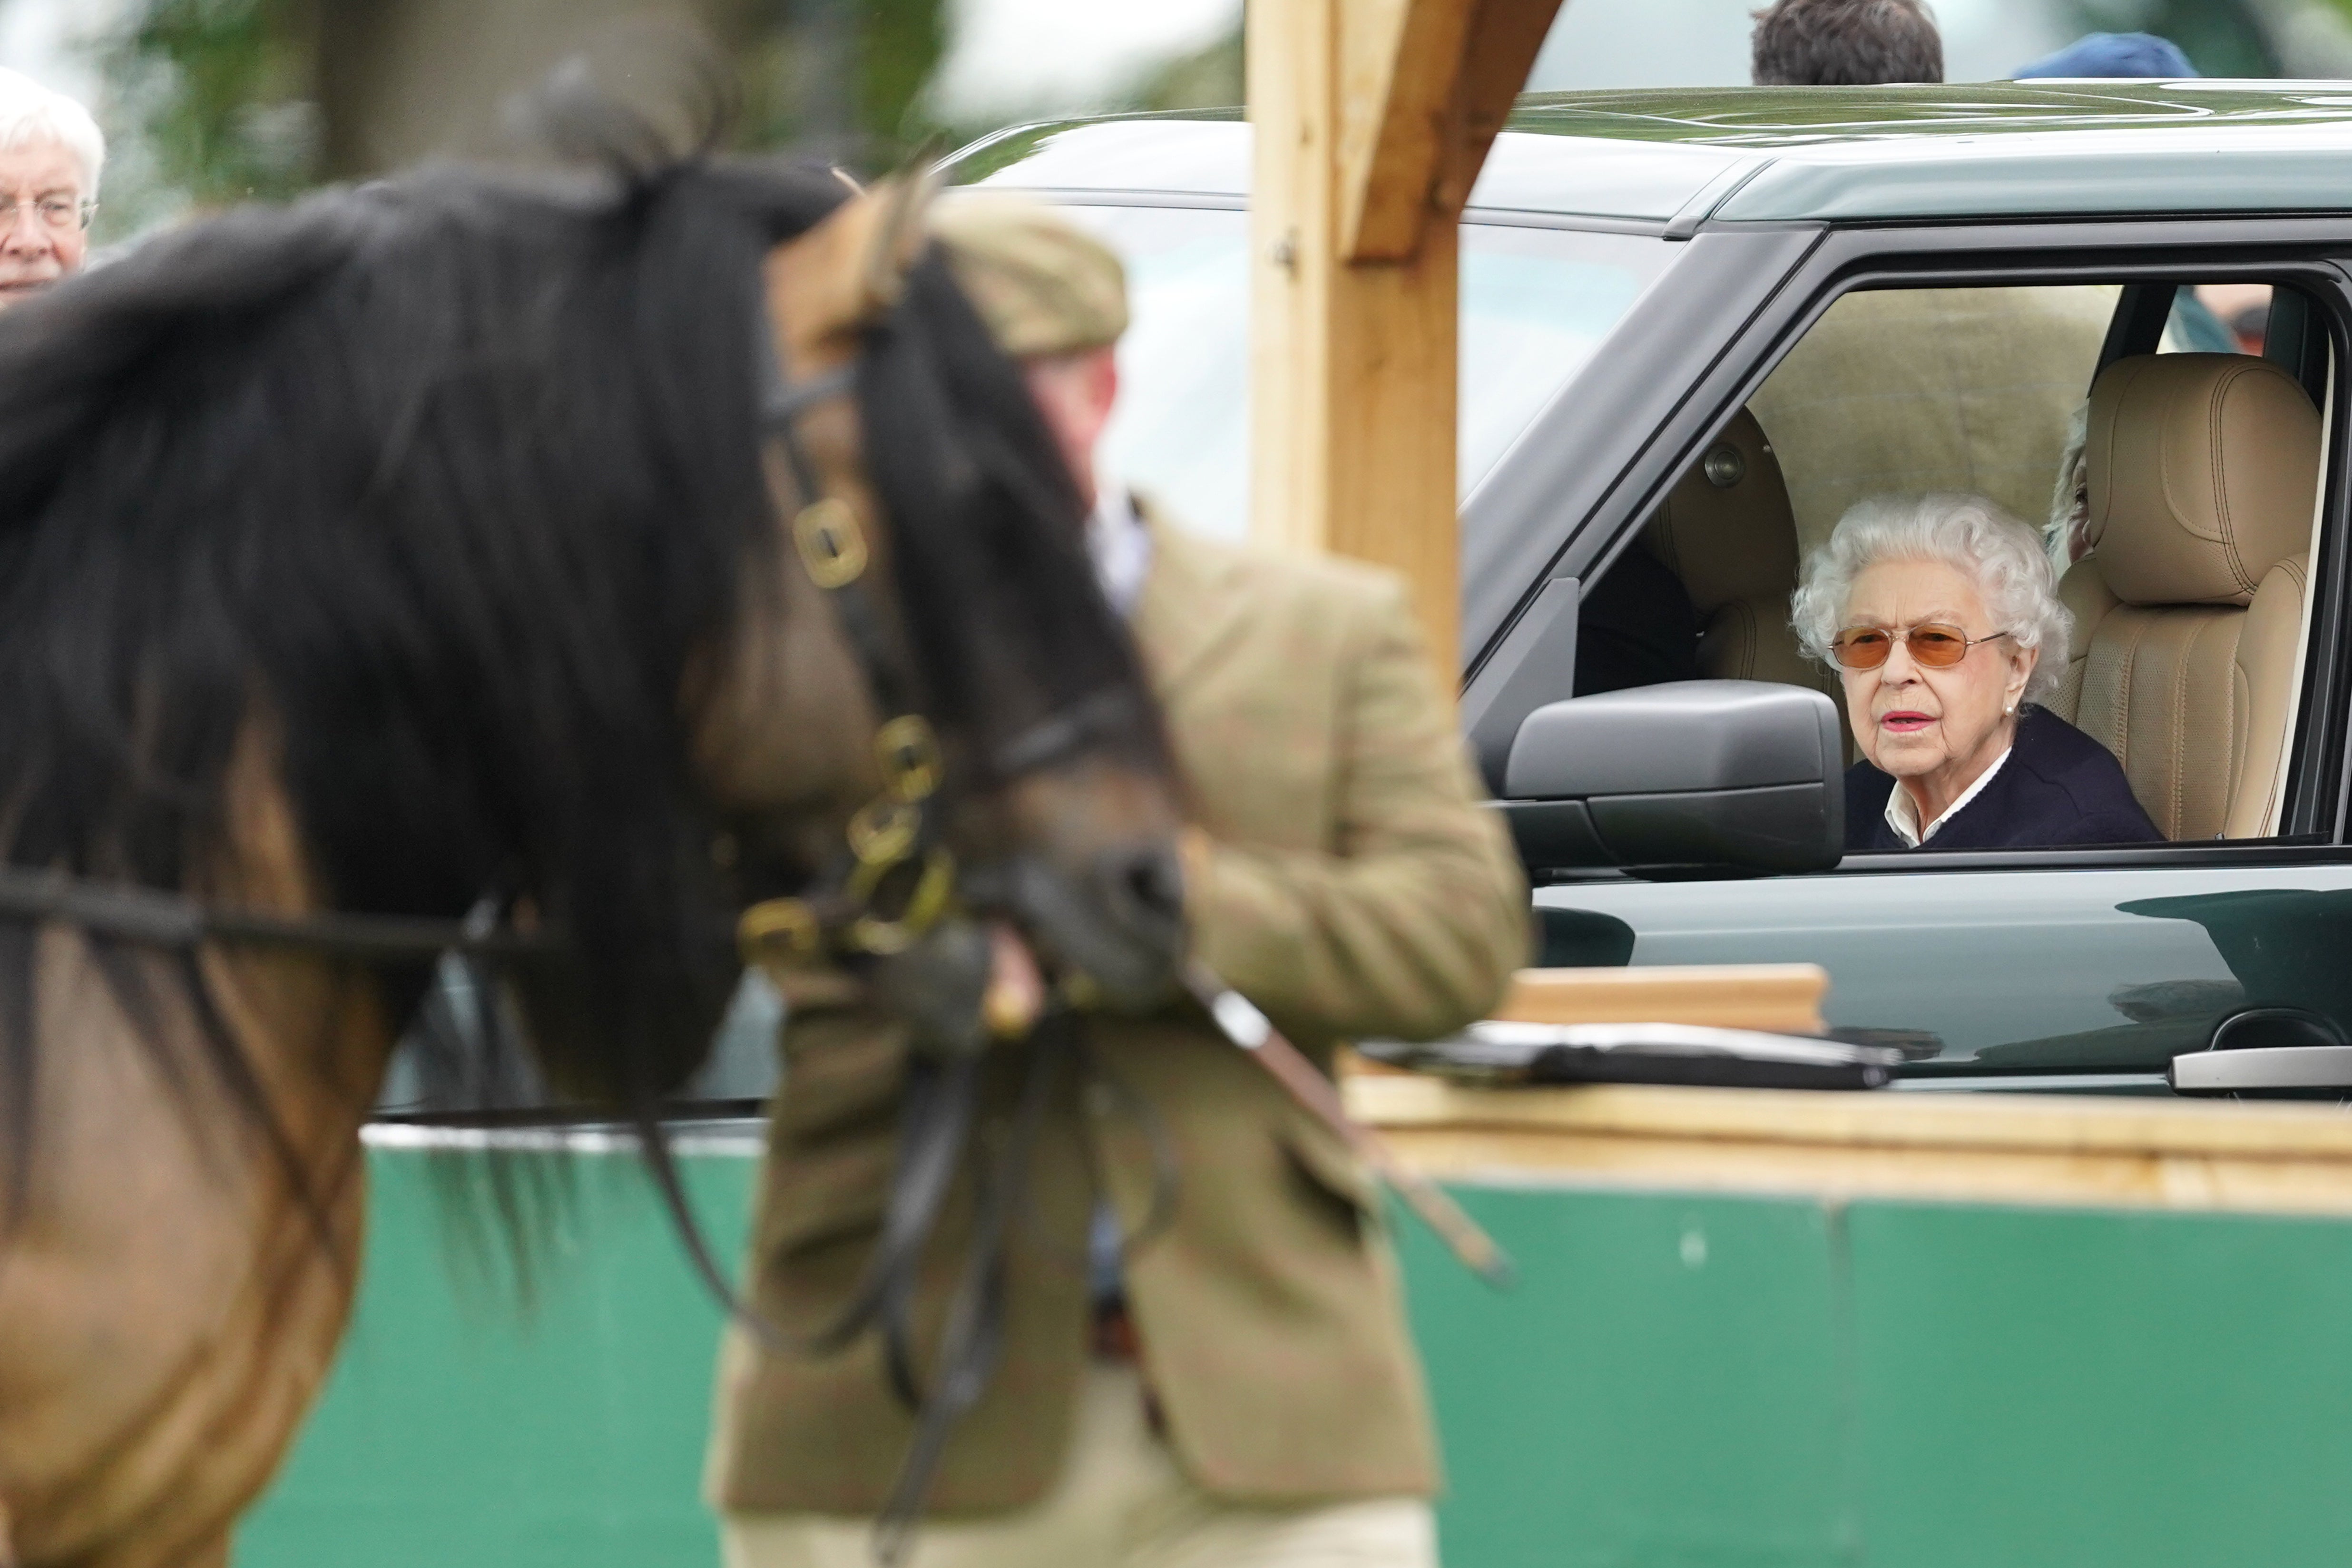 The Queen attended the Royal Windsor Horse Show in May (Steve Parsons/PA)